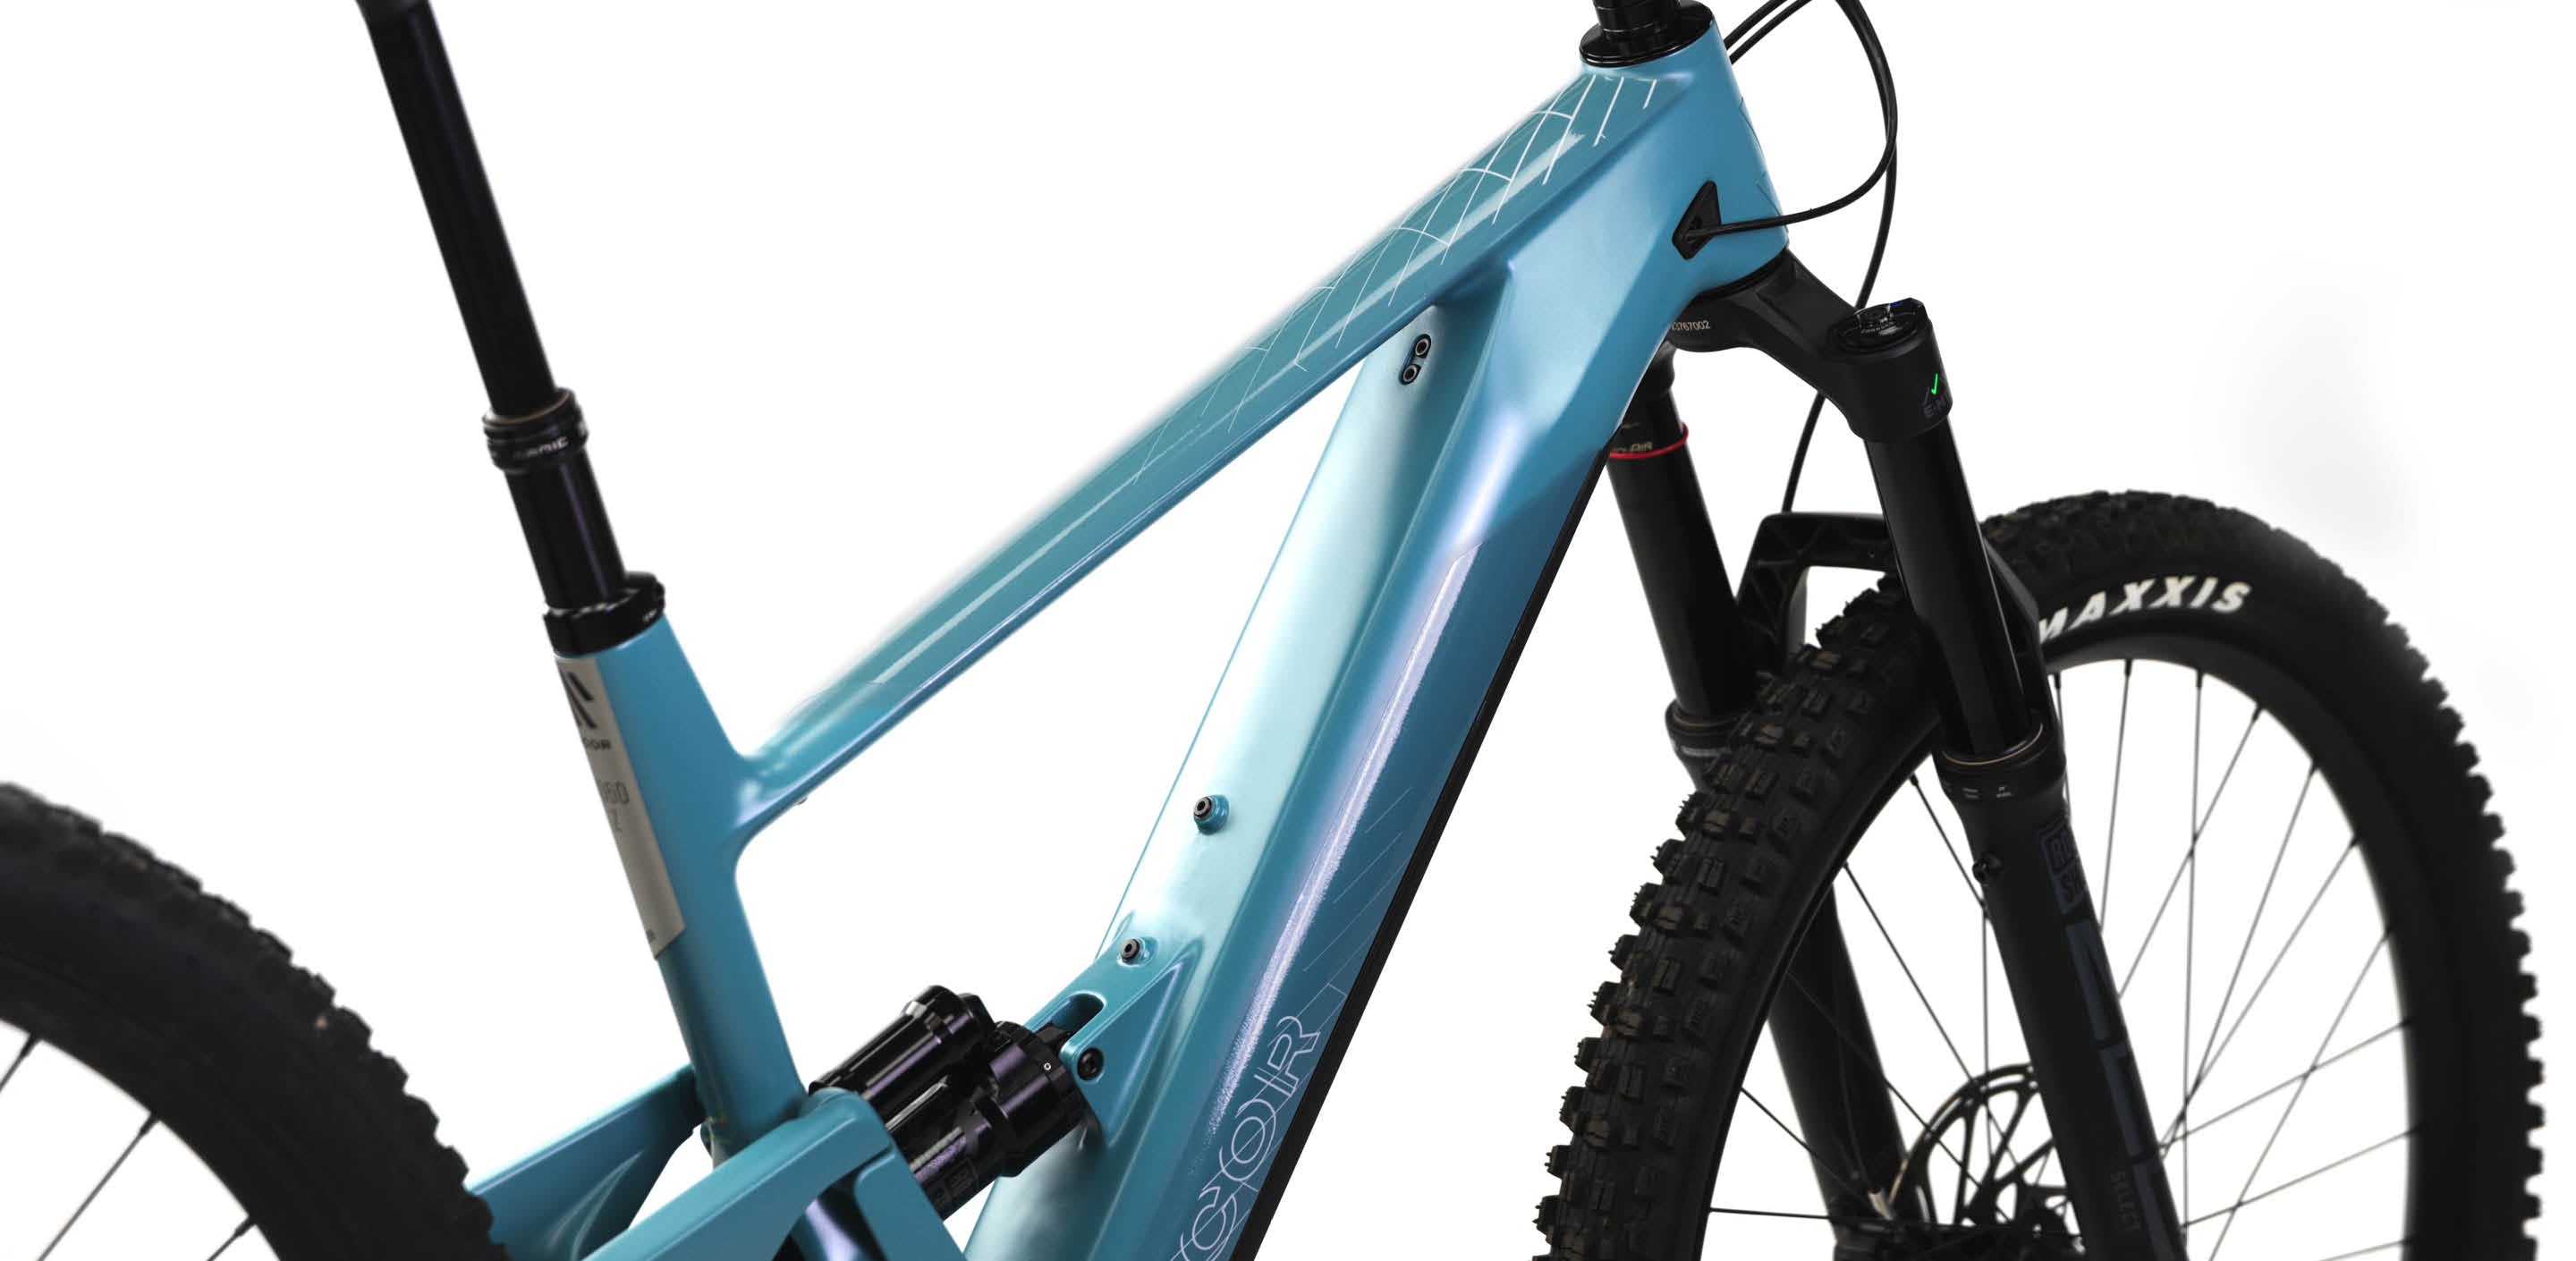 Frame Protector 4060 Z by Slicy | SCOR | accessories | Parts, Parts | Accessories